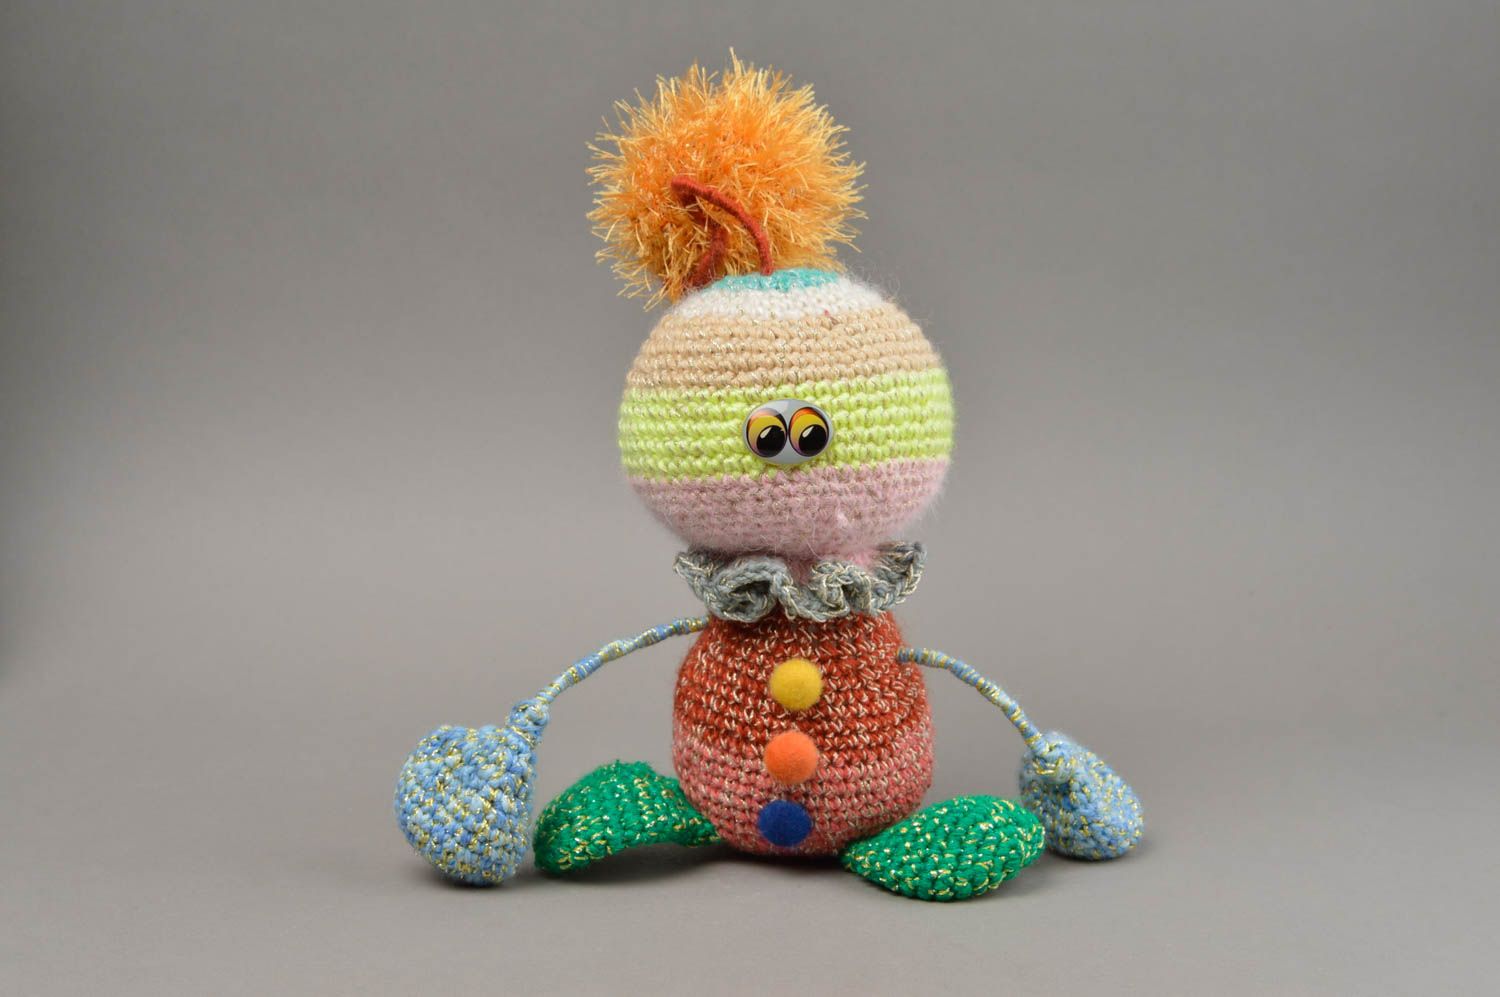 Unusual handmade soft toy stylish crocheted souvenirs unusual present for kids photo 2